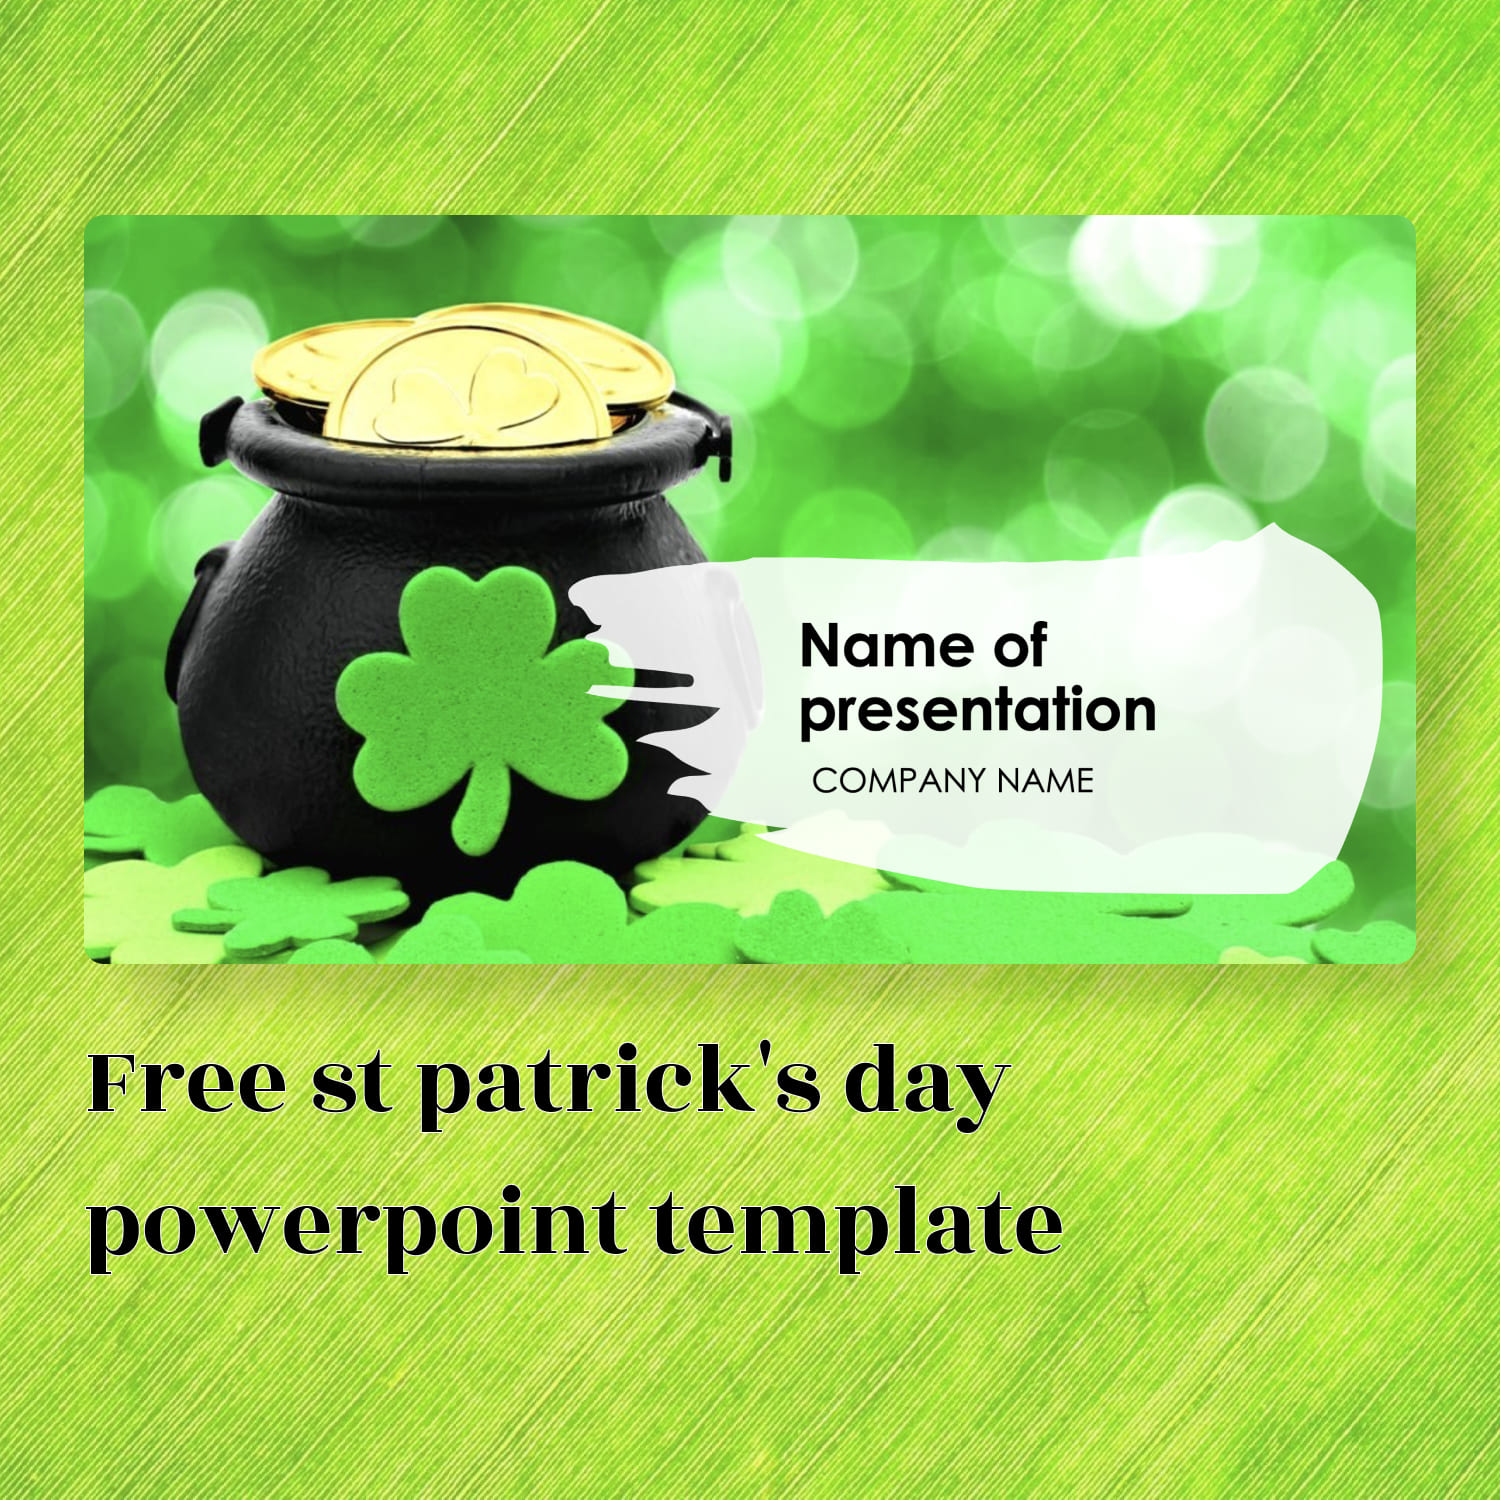 Free Green St Patrick's Day Powerpoint Template.